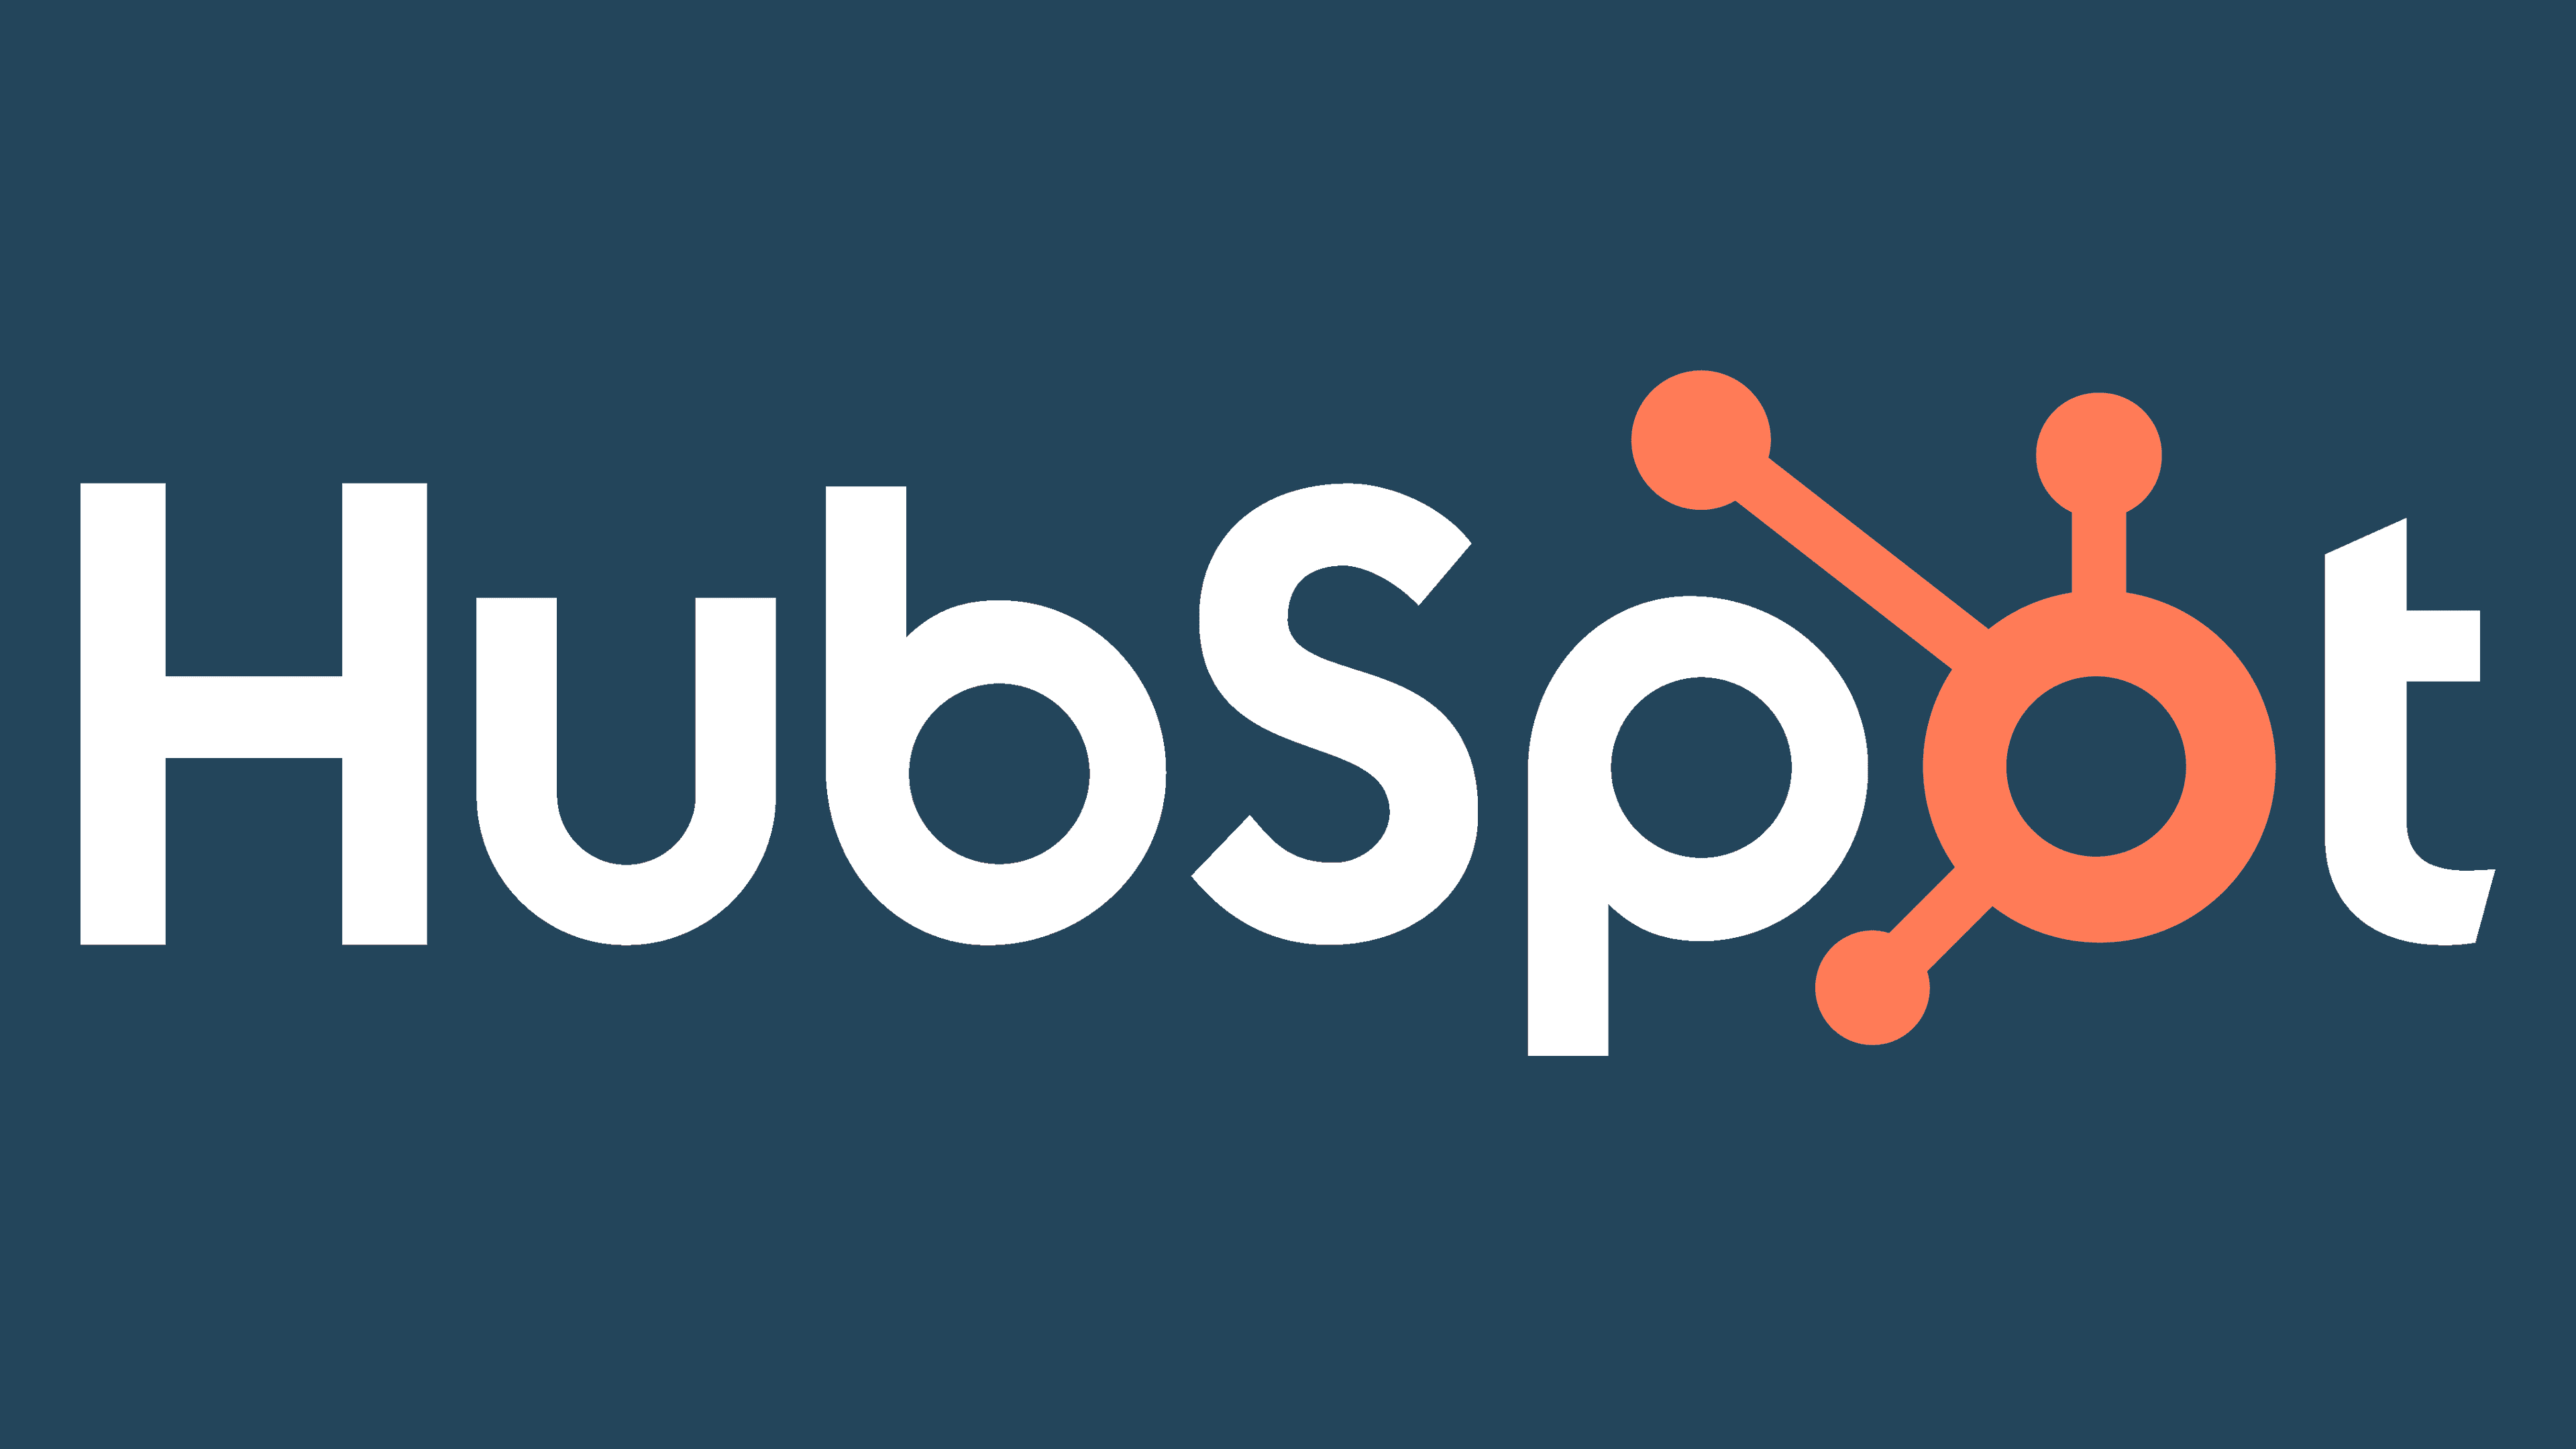 Hubspot names Cleerly Among 40 AI Startups To Watch Out For in 2023